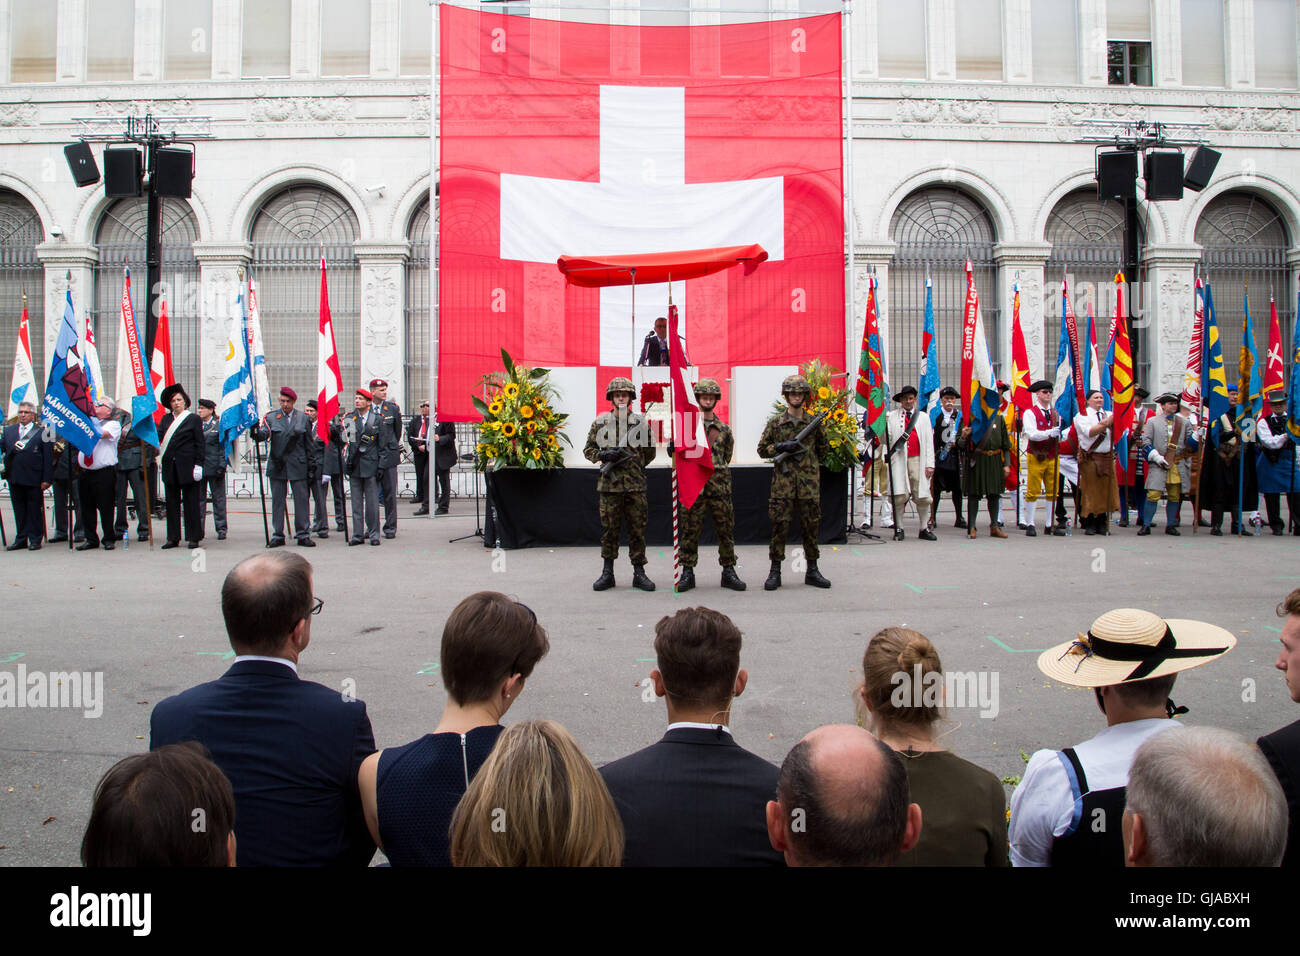 A huge Swiss flag on show at ceremony in Zurich in celebration of Swiss National Day. Stock Photo